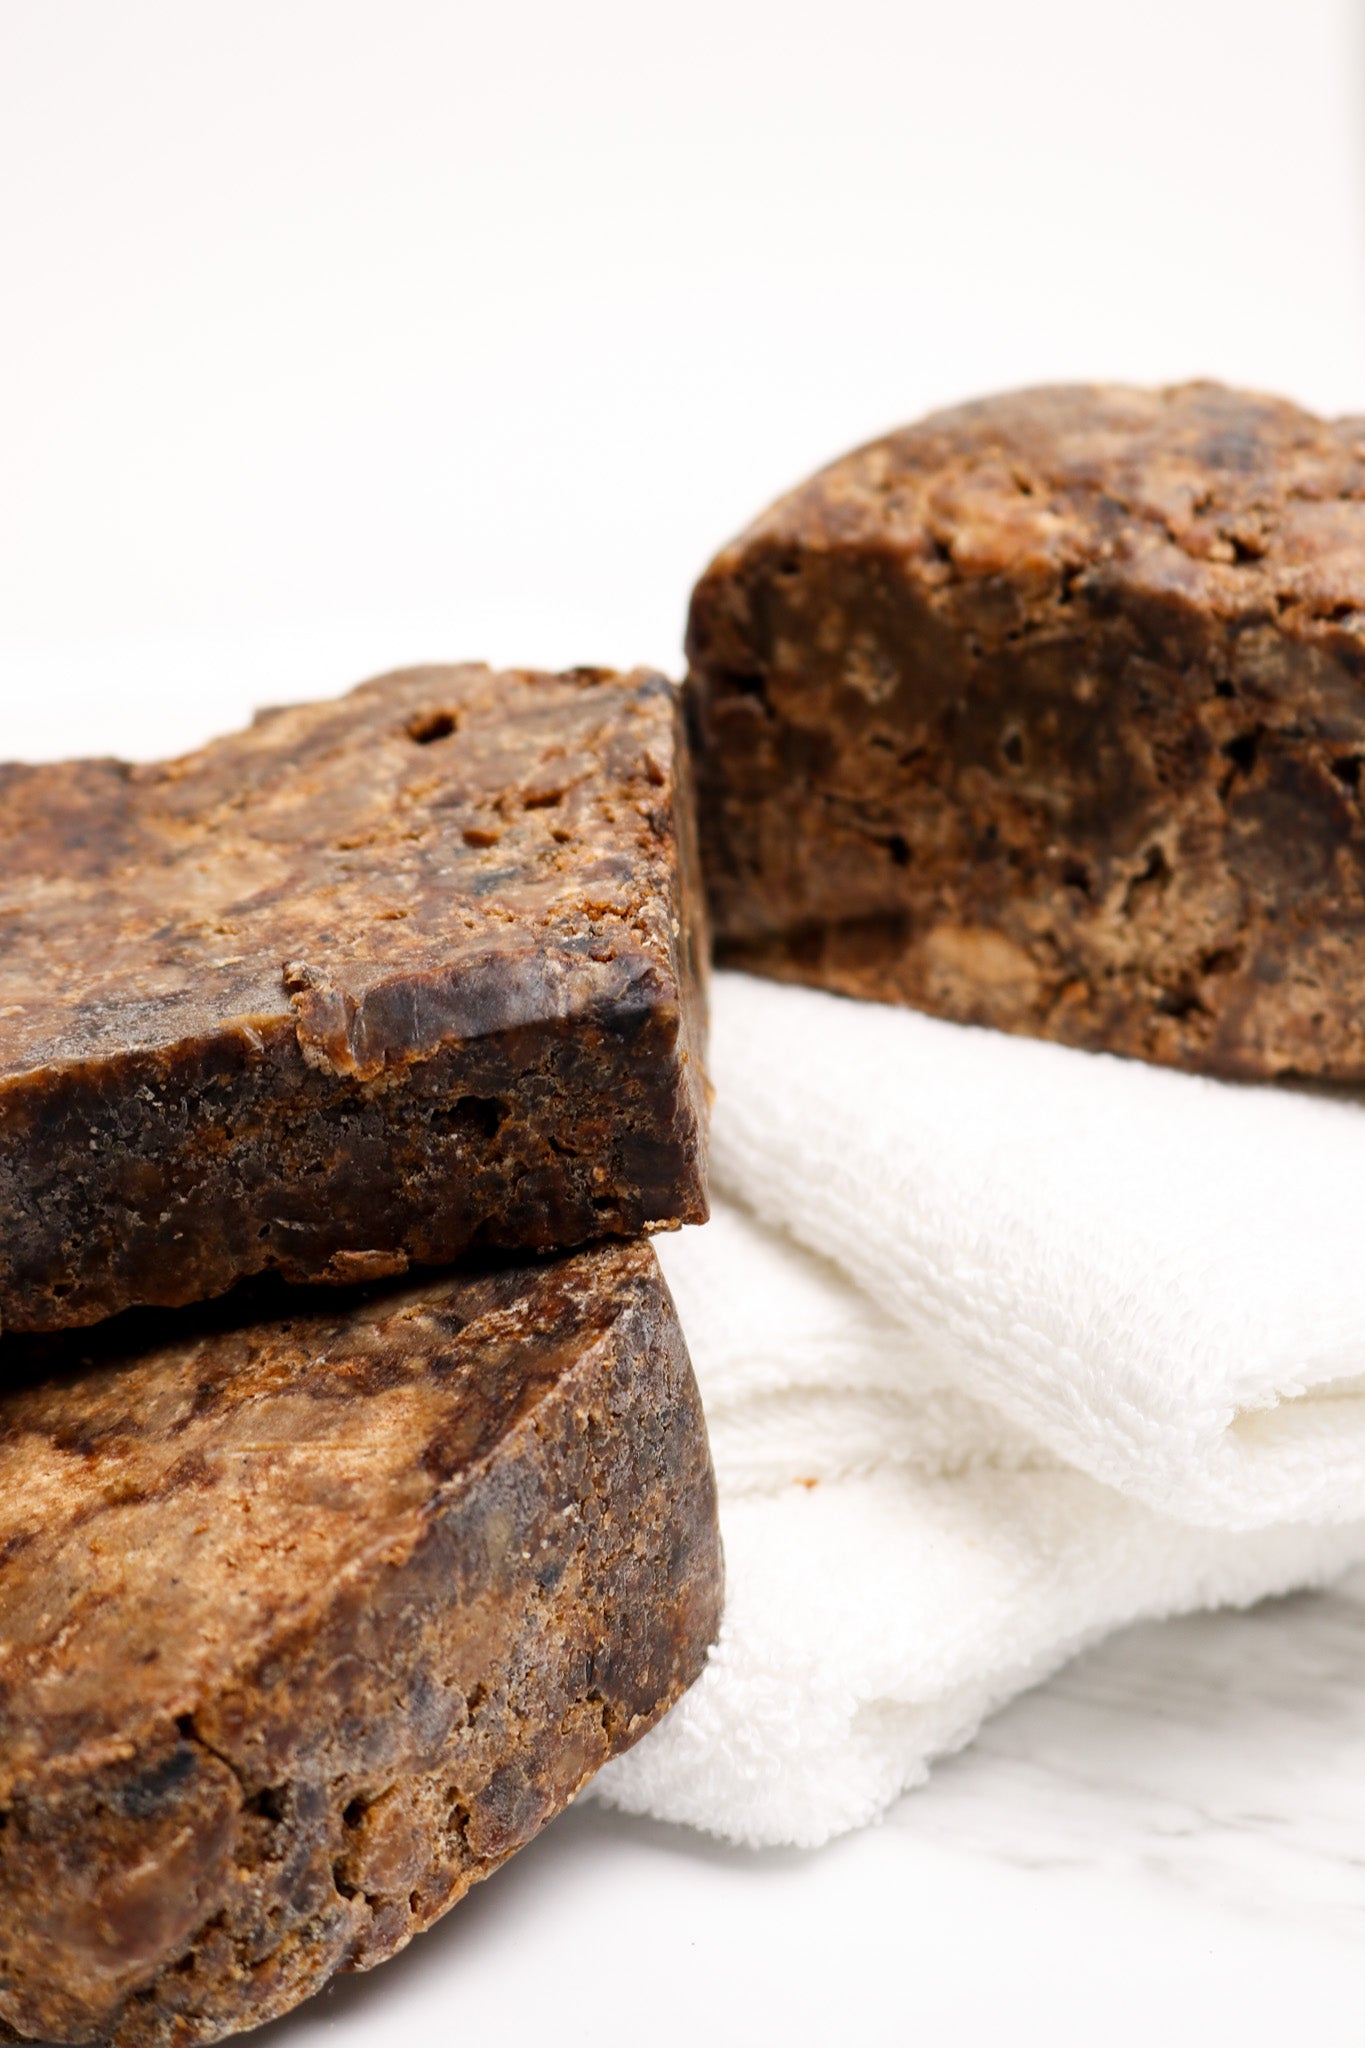 Our Sunny In Denbigh African black soap cleanses Skin, is great for Sensitive Skin Types, Soothes & Heals Eczema, Reduces Blemishes & Dark Spots, Fights Facial & Body Acne, Calms Psoriasis, Reduces Oily Skin, and Minimizes Fine Lines & Wrinkles, Evens Out Dark Spots, Unclogs Blocked Pores, Helps Fade Acne Scars, Soothes Razor Bumps, Eliminates Fungal Skin Infections.